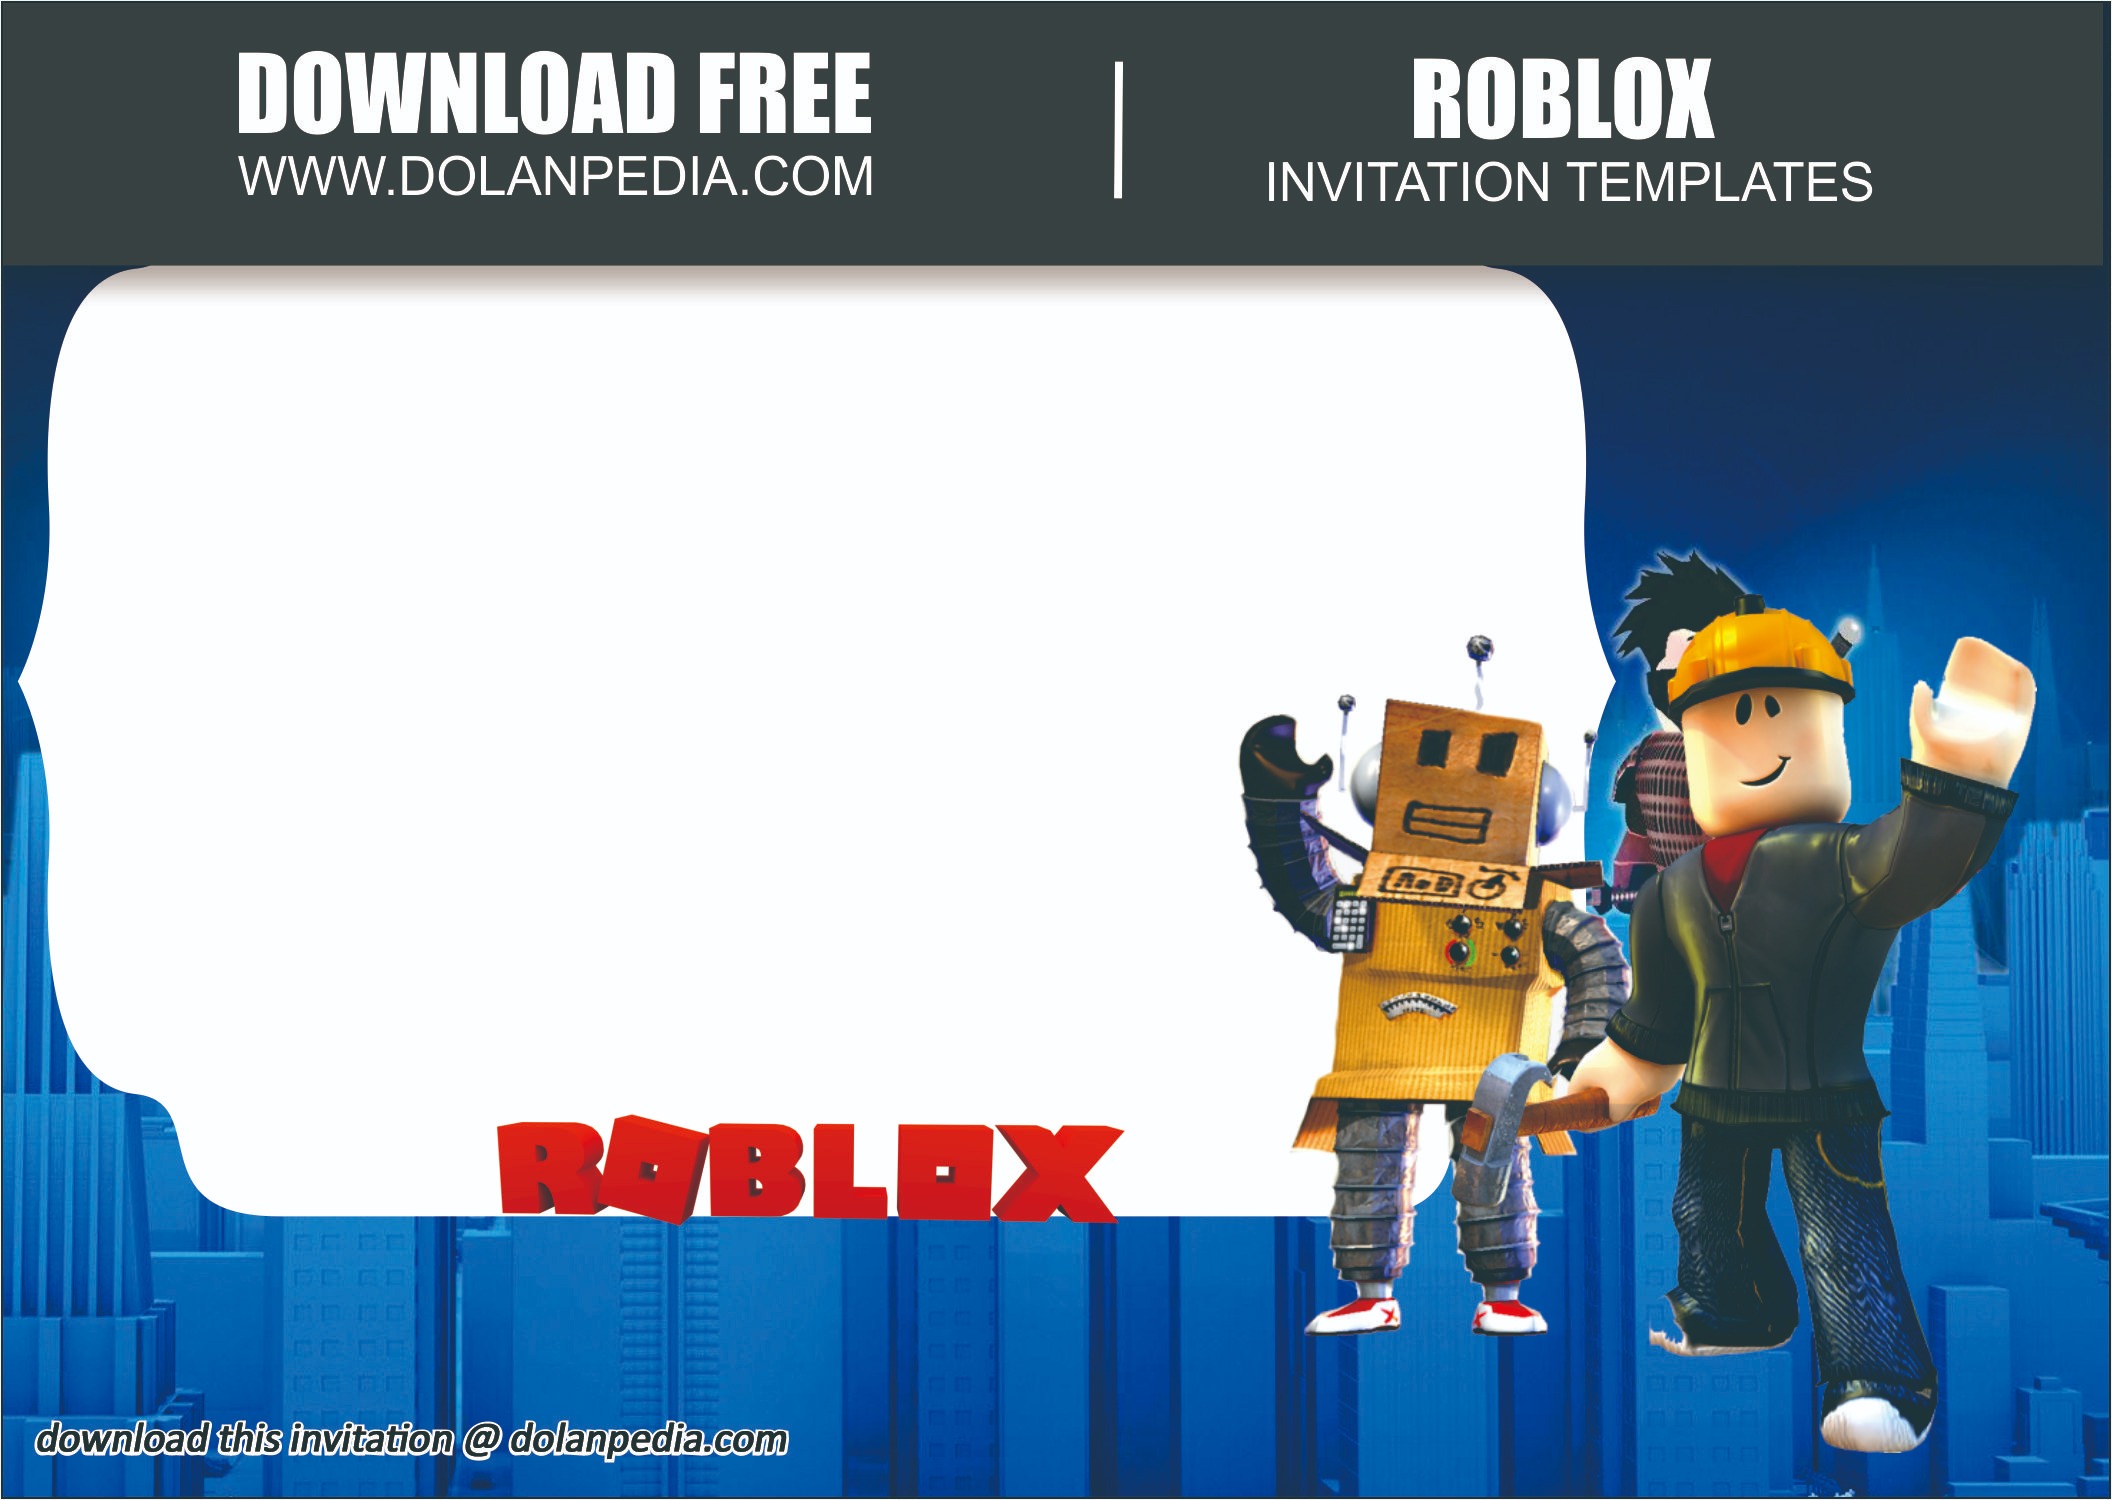 Free Printable Roblox Invitation Template Dolanpedia Invitations Template - how to download free templates on roblox